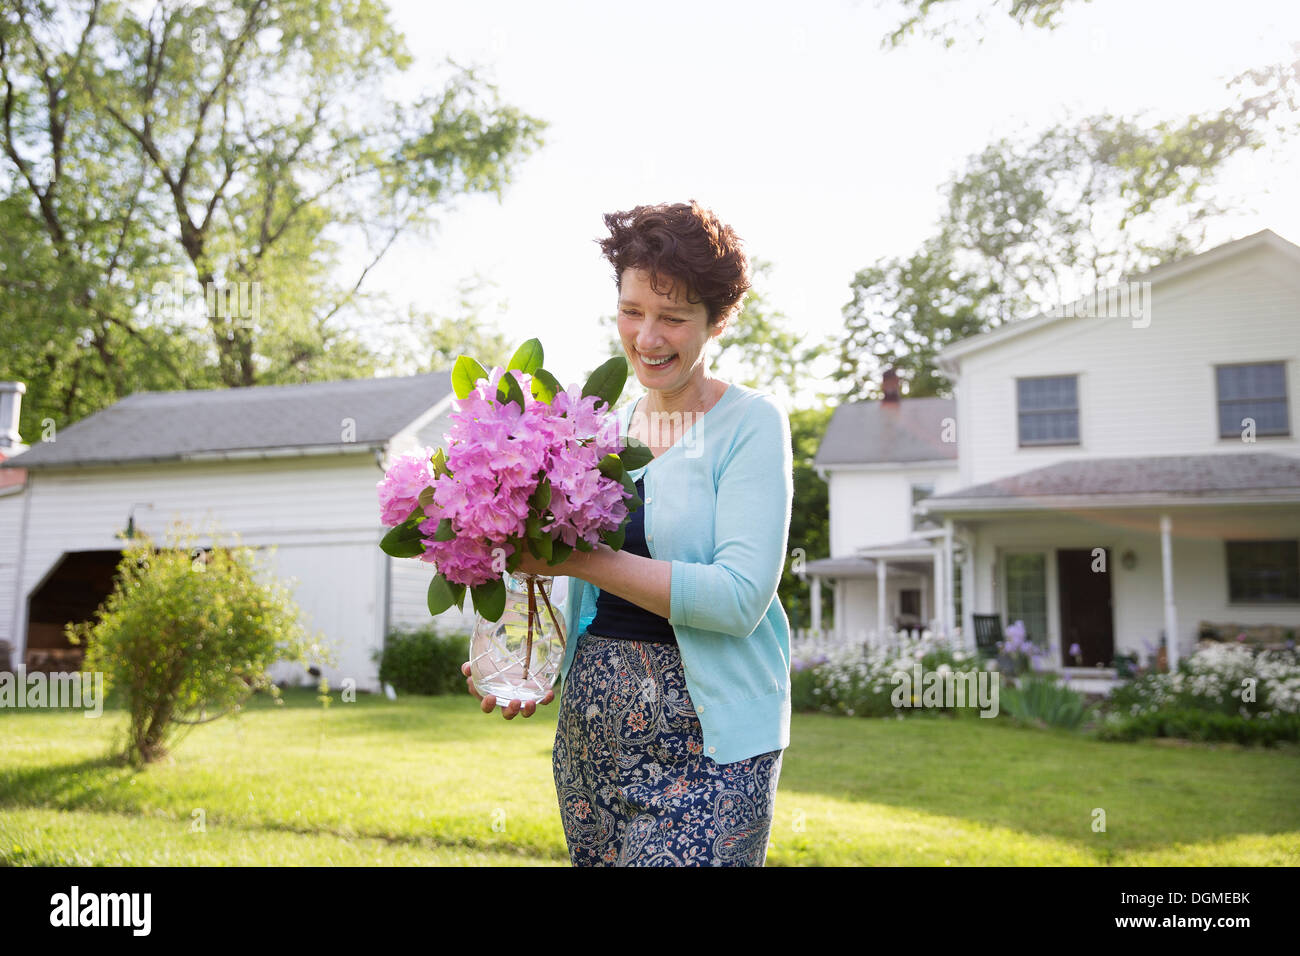 Family party. A woman carrying a large bunch of rhododendron flowers, smiling broadly. Stock Photo